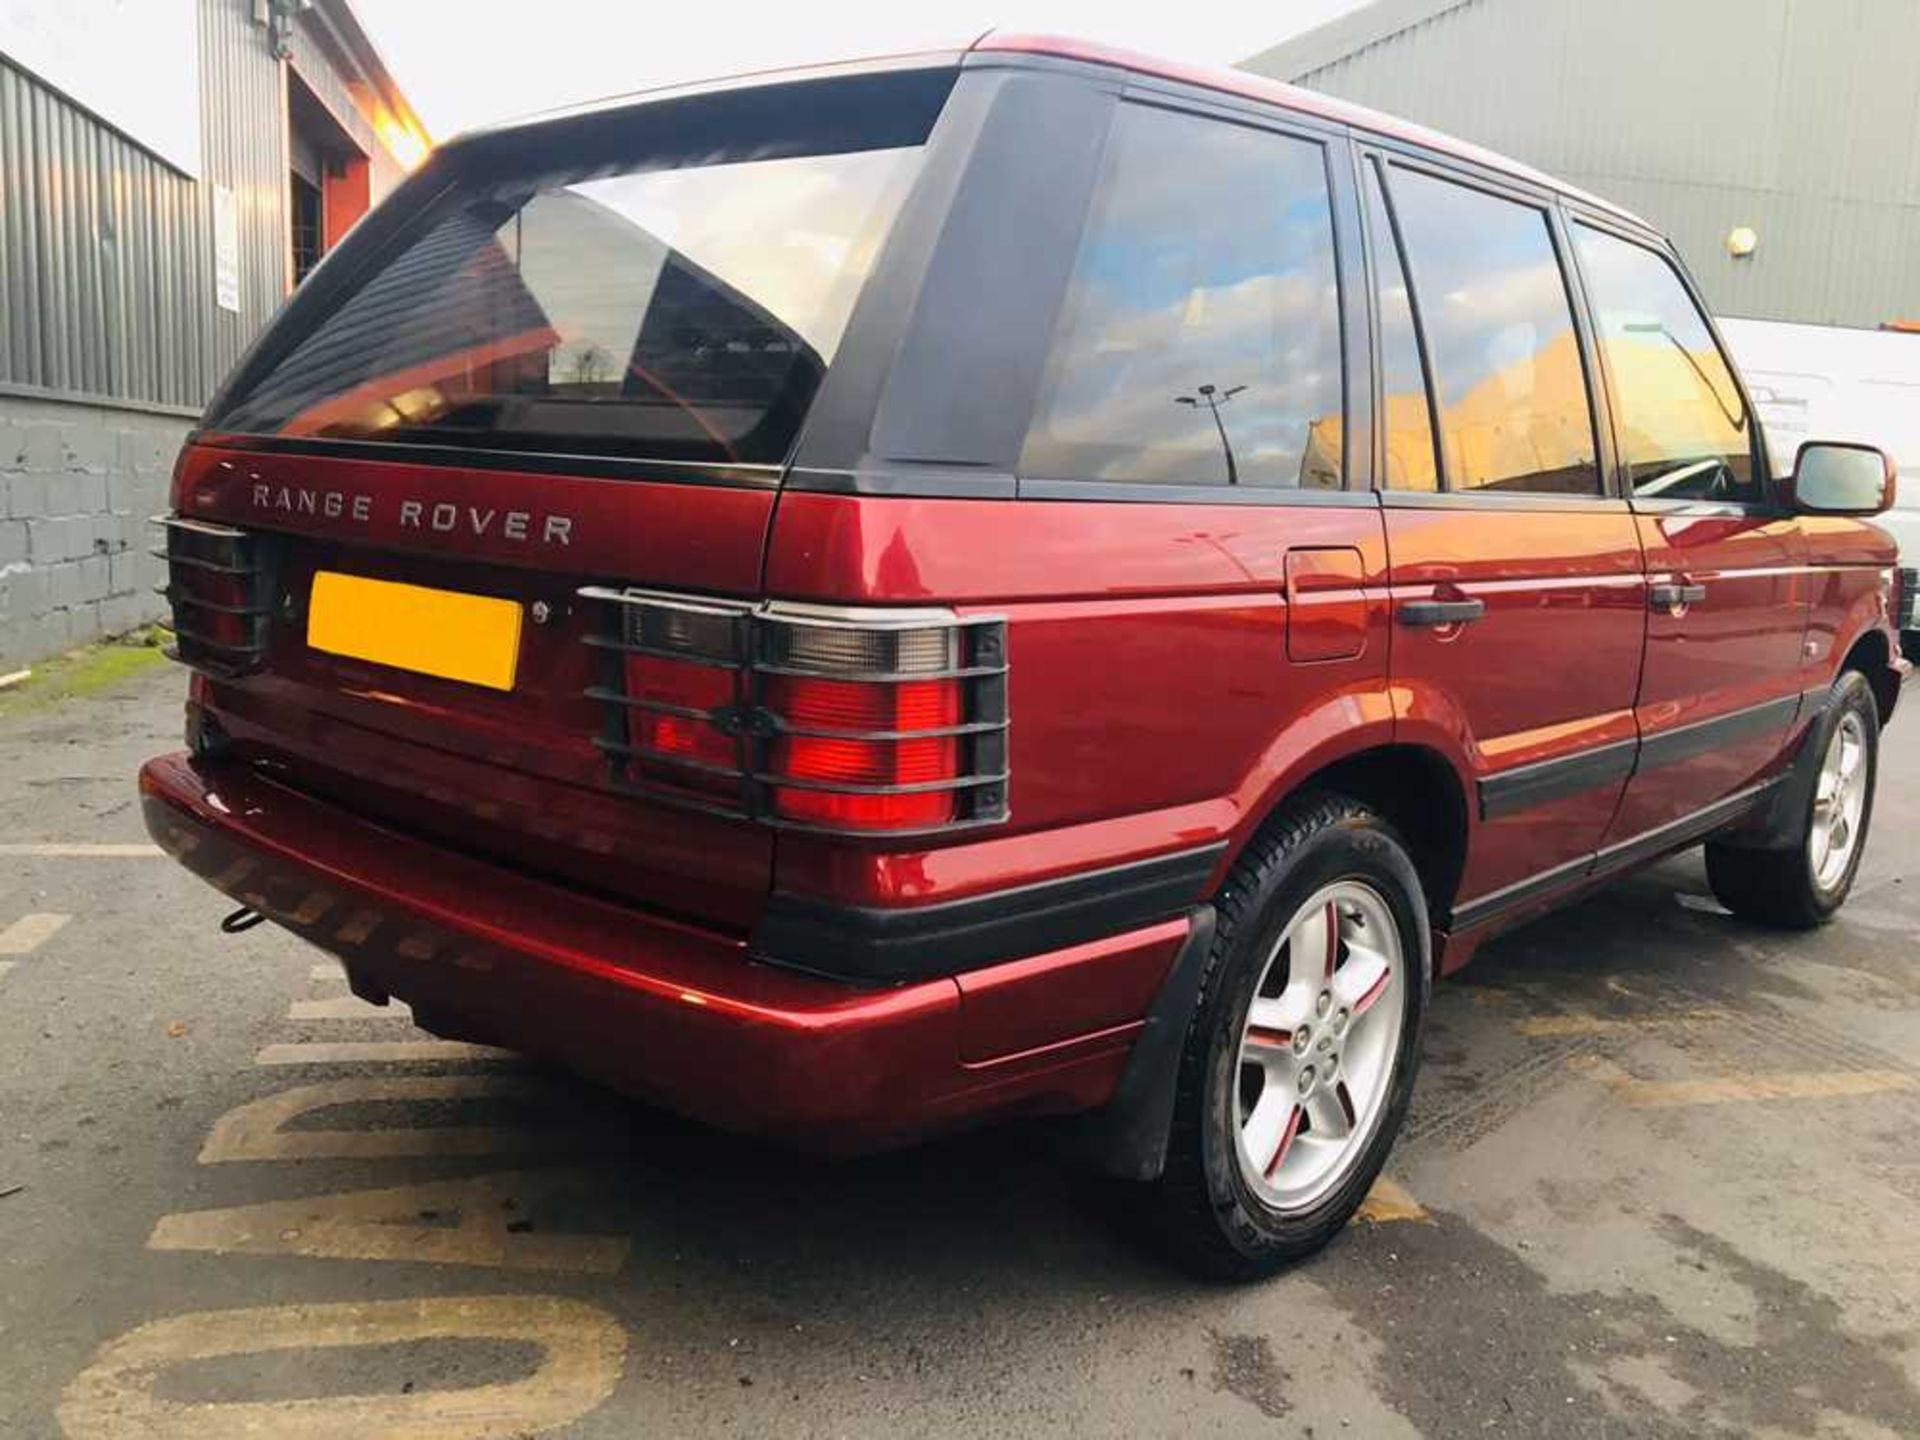 2001 Range Rover 2.5 TD Bordeaux One of just 200 UK-supplied limited edition 'Bordeaux' examples - Bild 6 aus 20